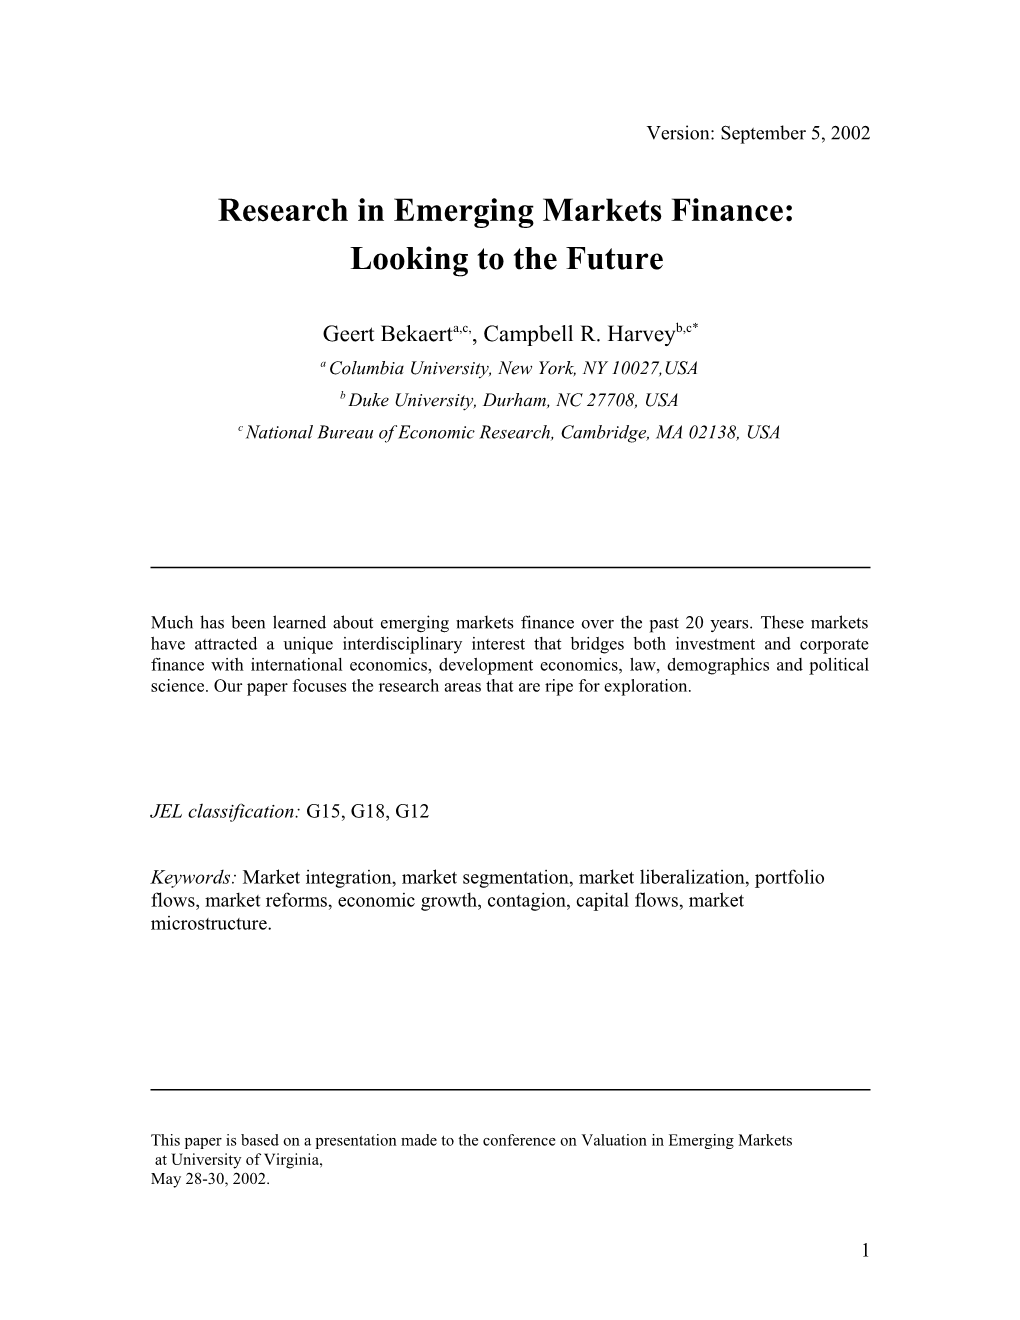 Emerging Market and Finance